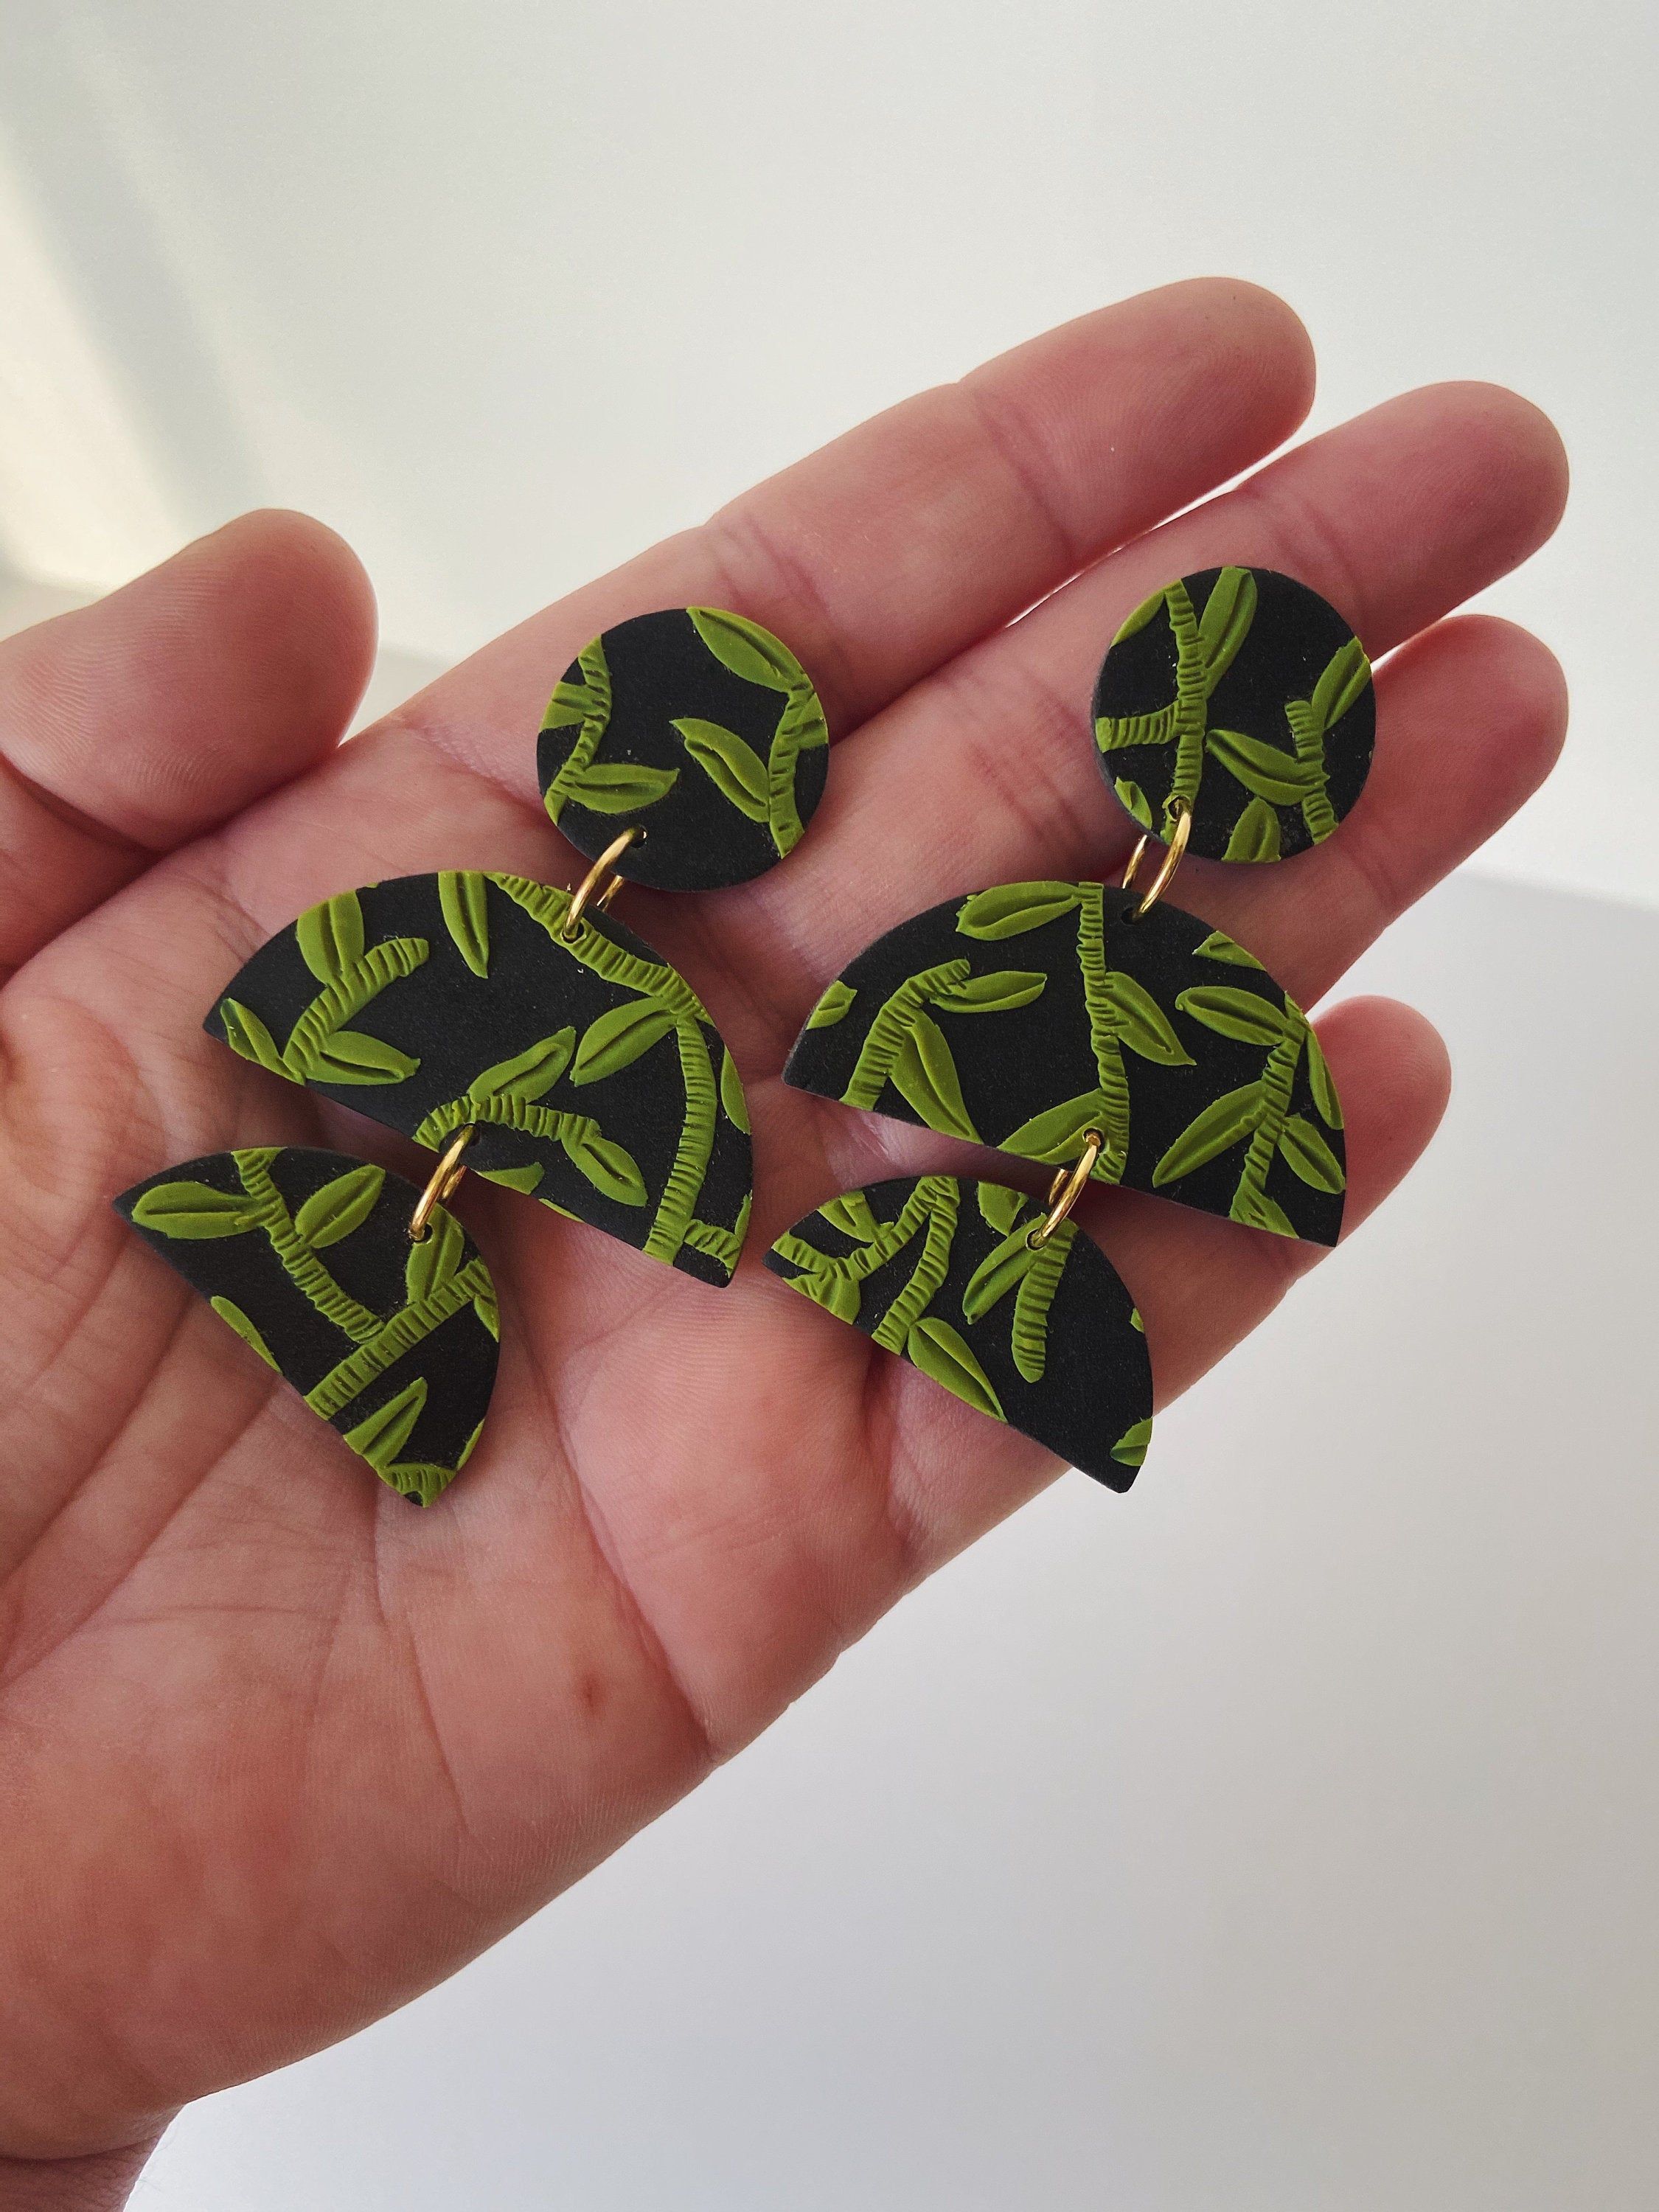 T H E A N N A | modern polymer clay jewelry | drop earrings | minimal with flair | geometric | gift for her | ready to ship -   18 DIY Clothes Goth polymer clay ideas